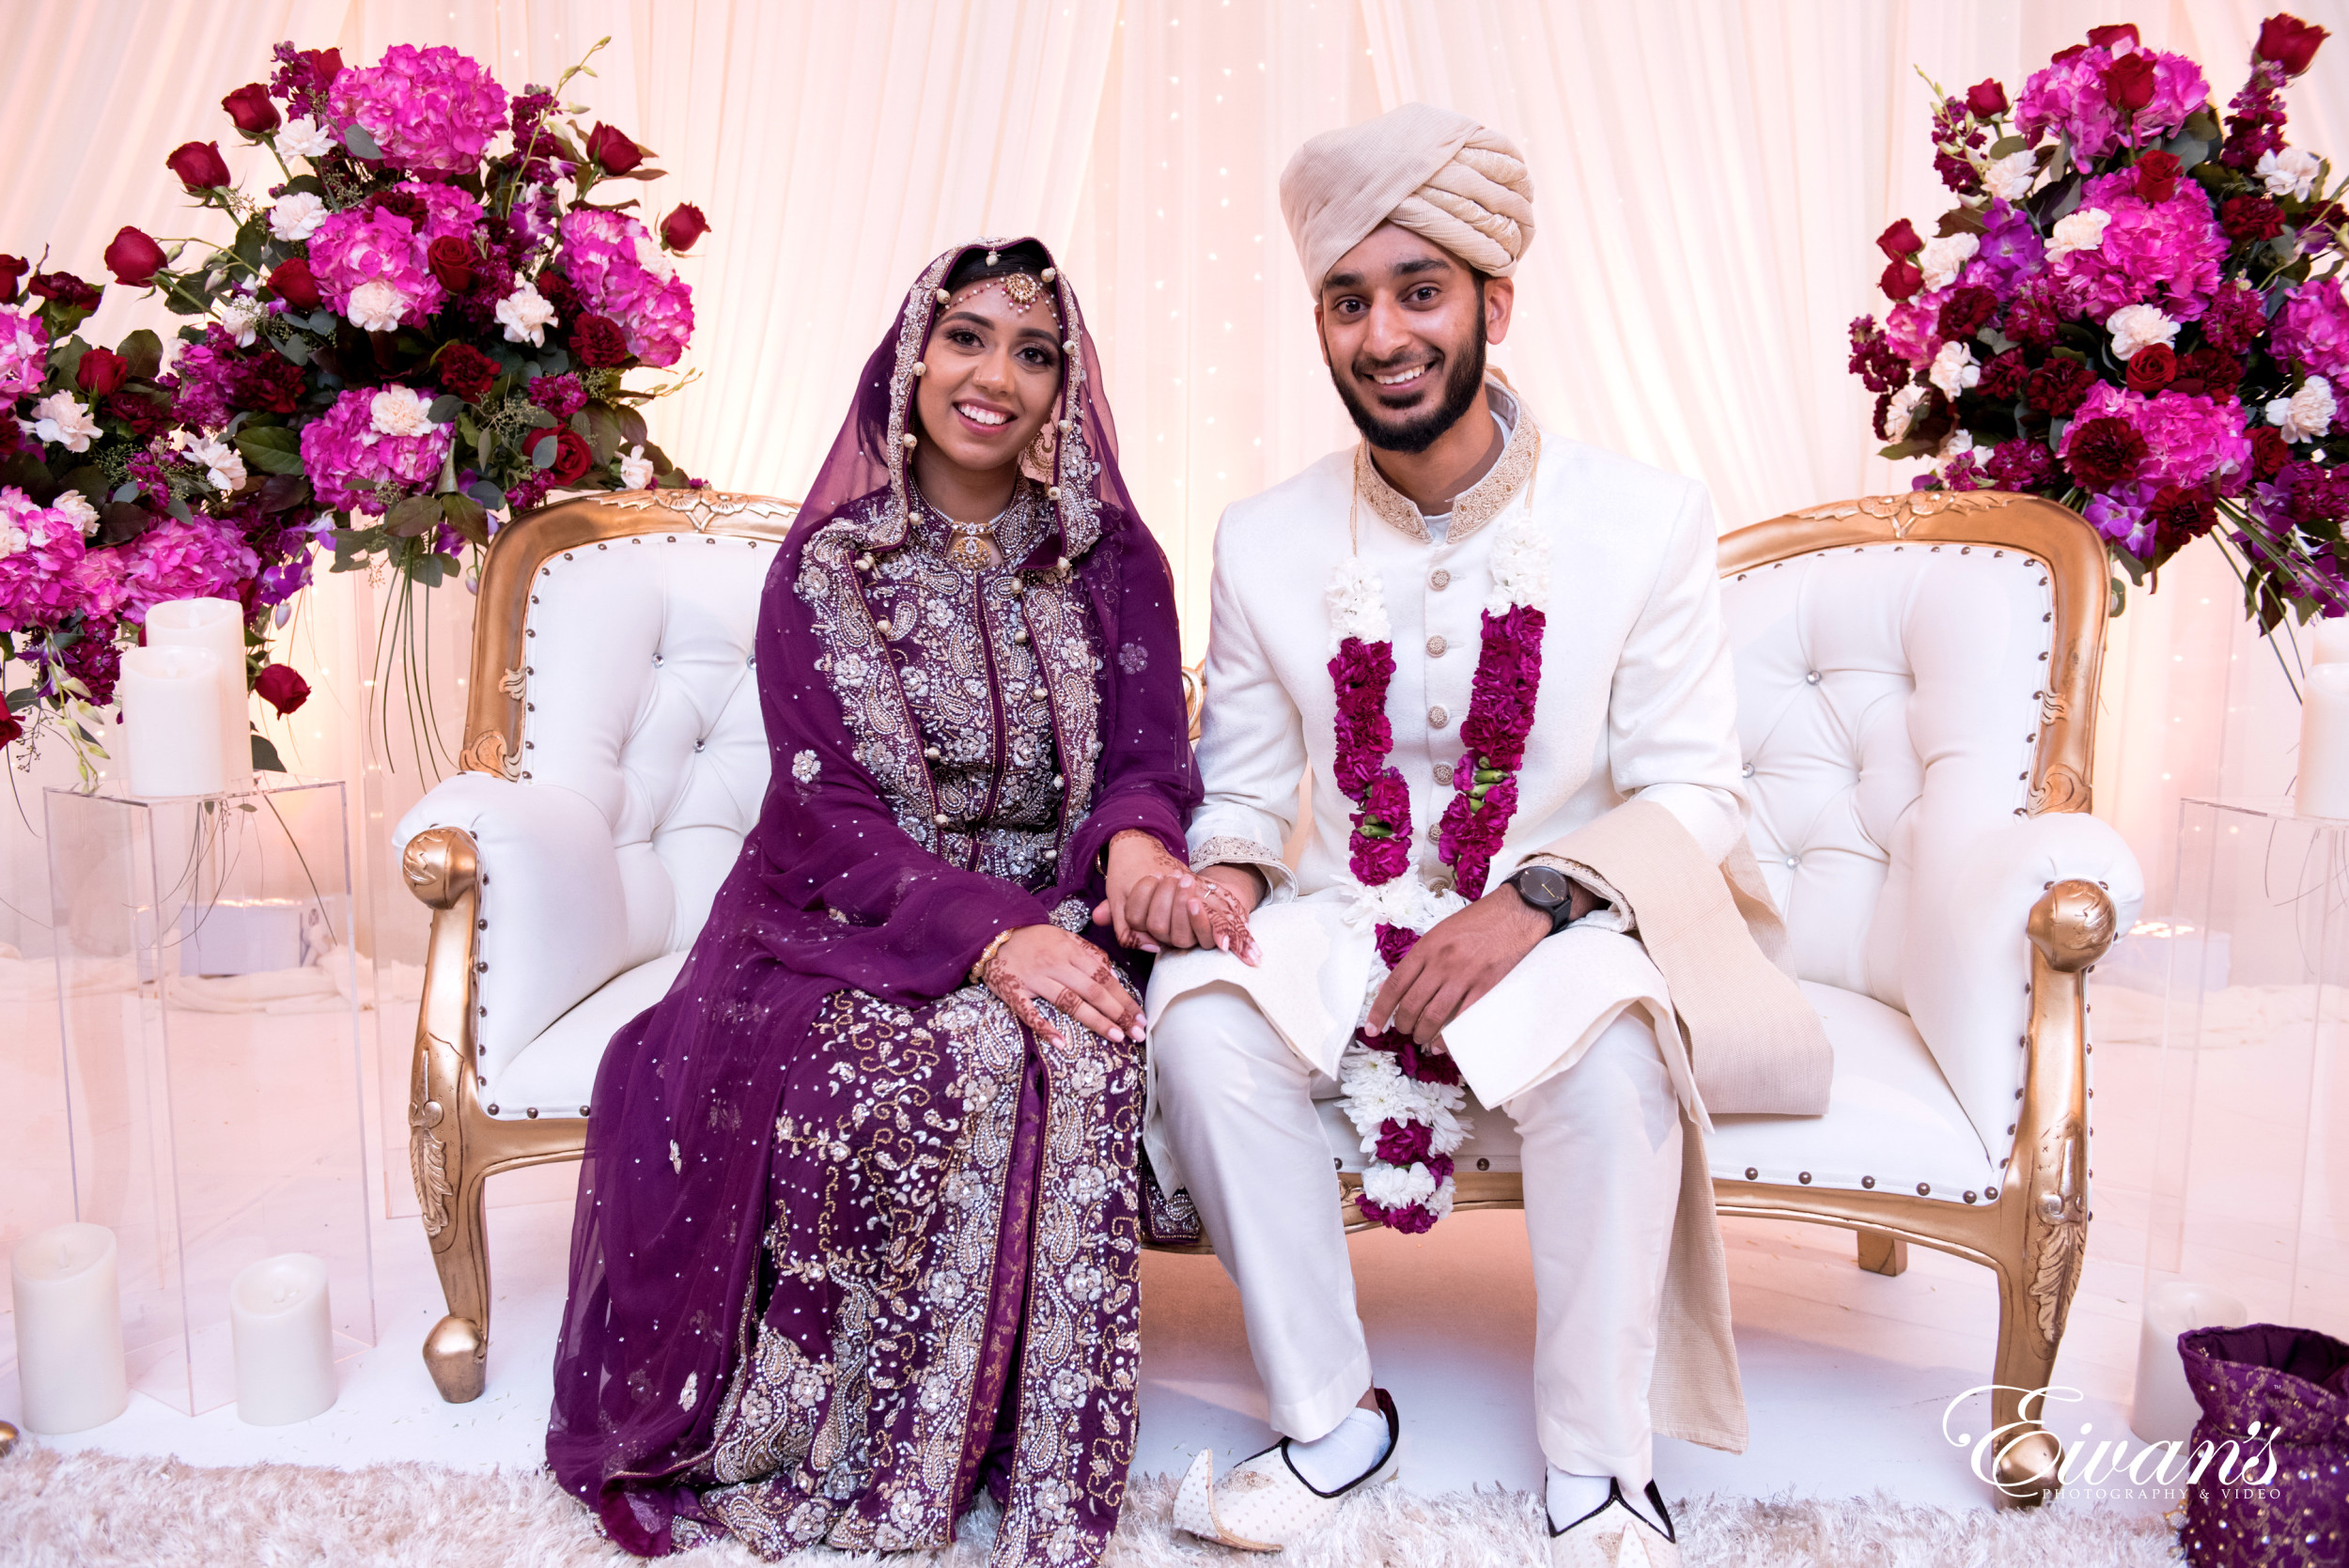 Modern Arabic Wedding Traditions & Customs You Should Know